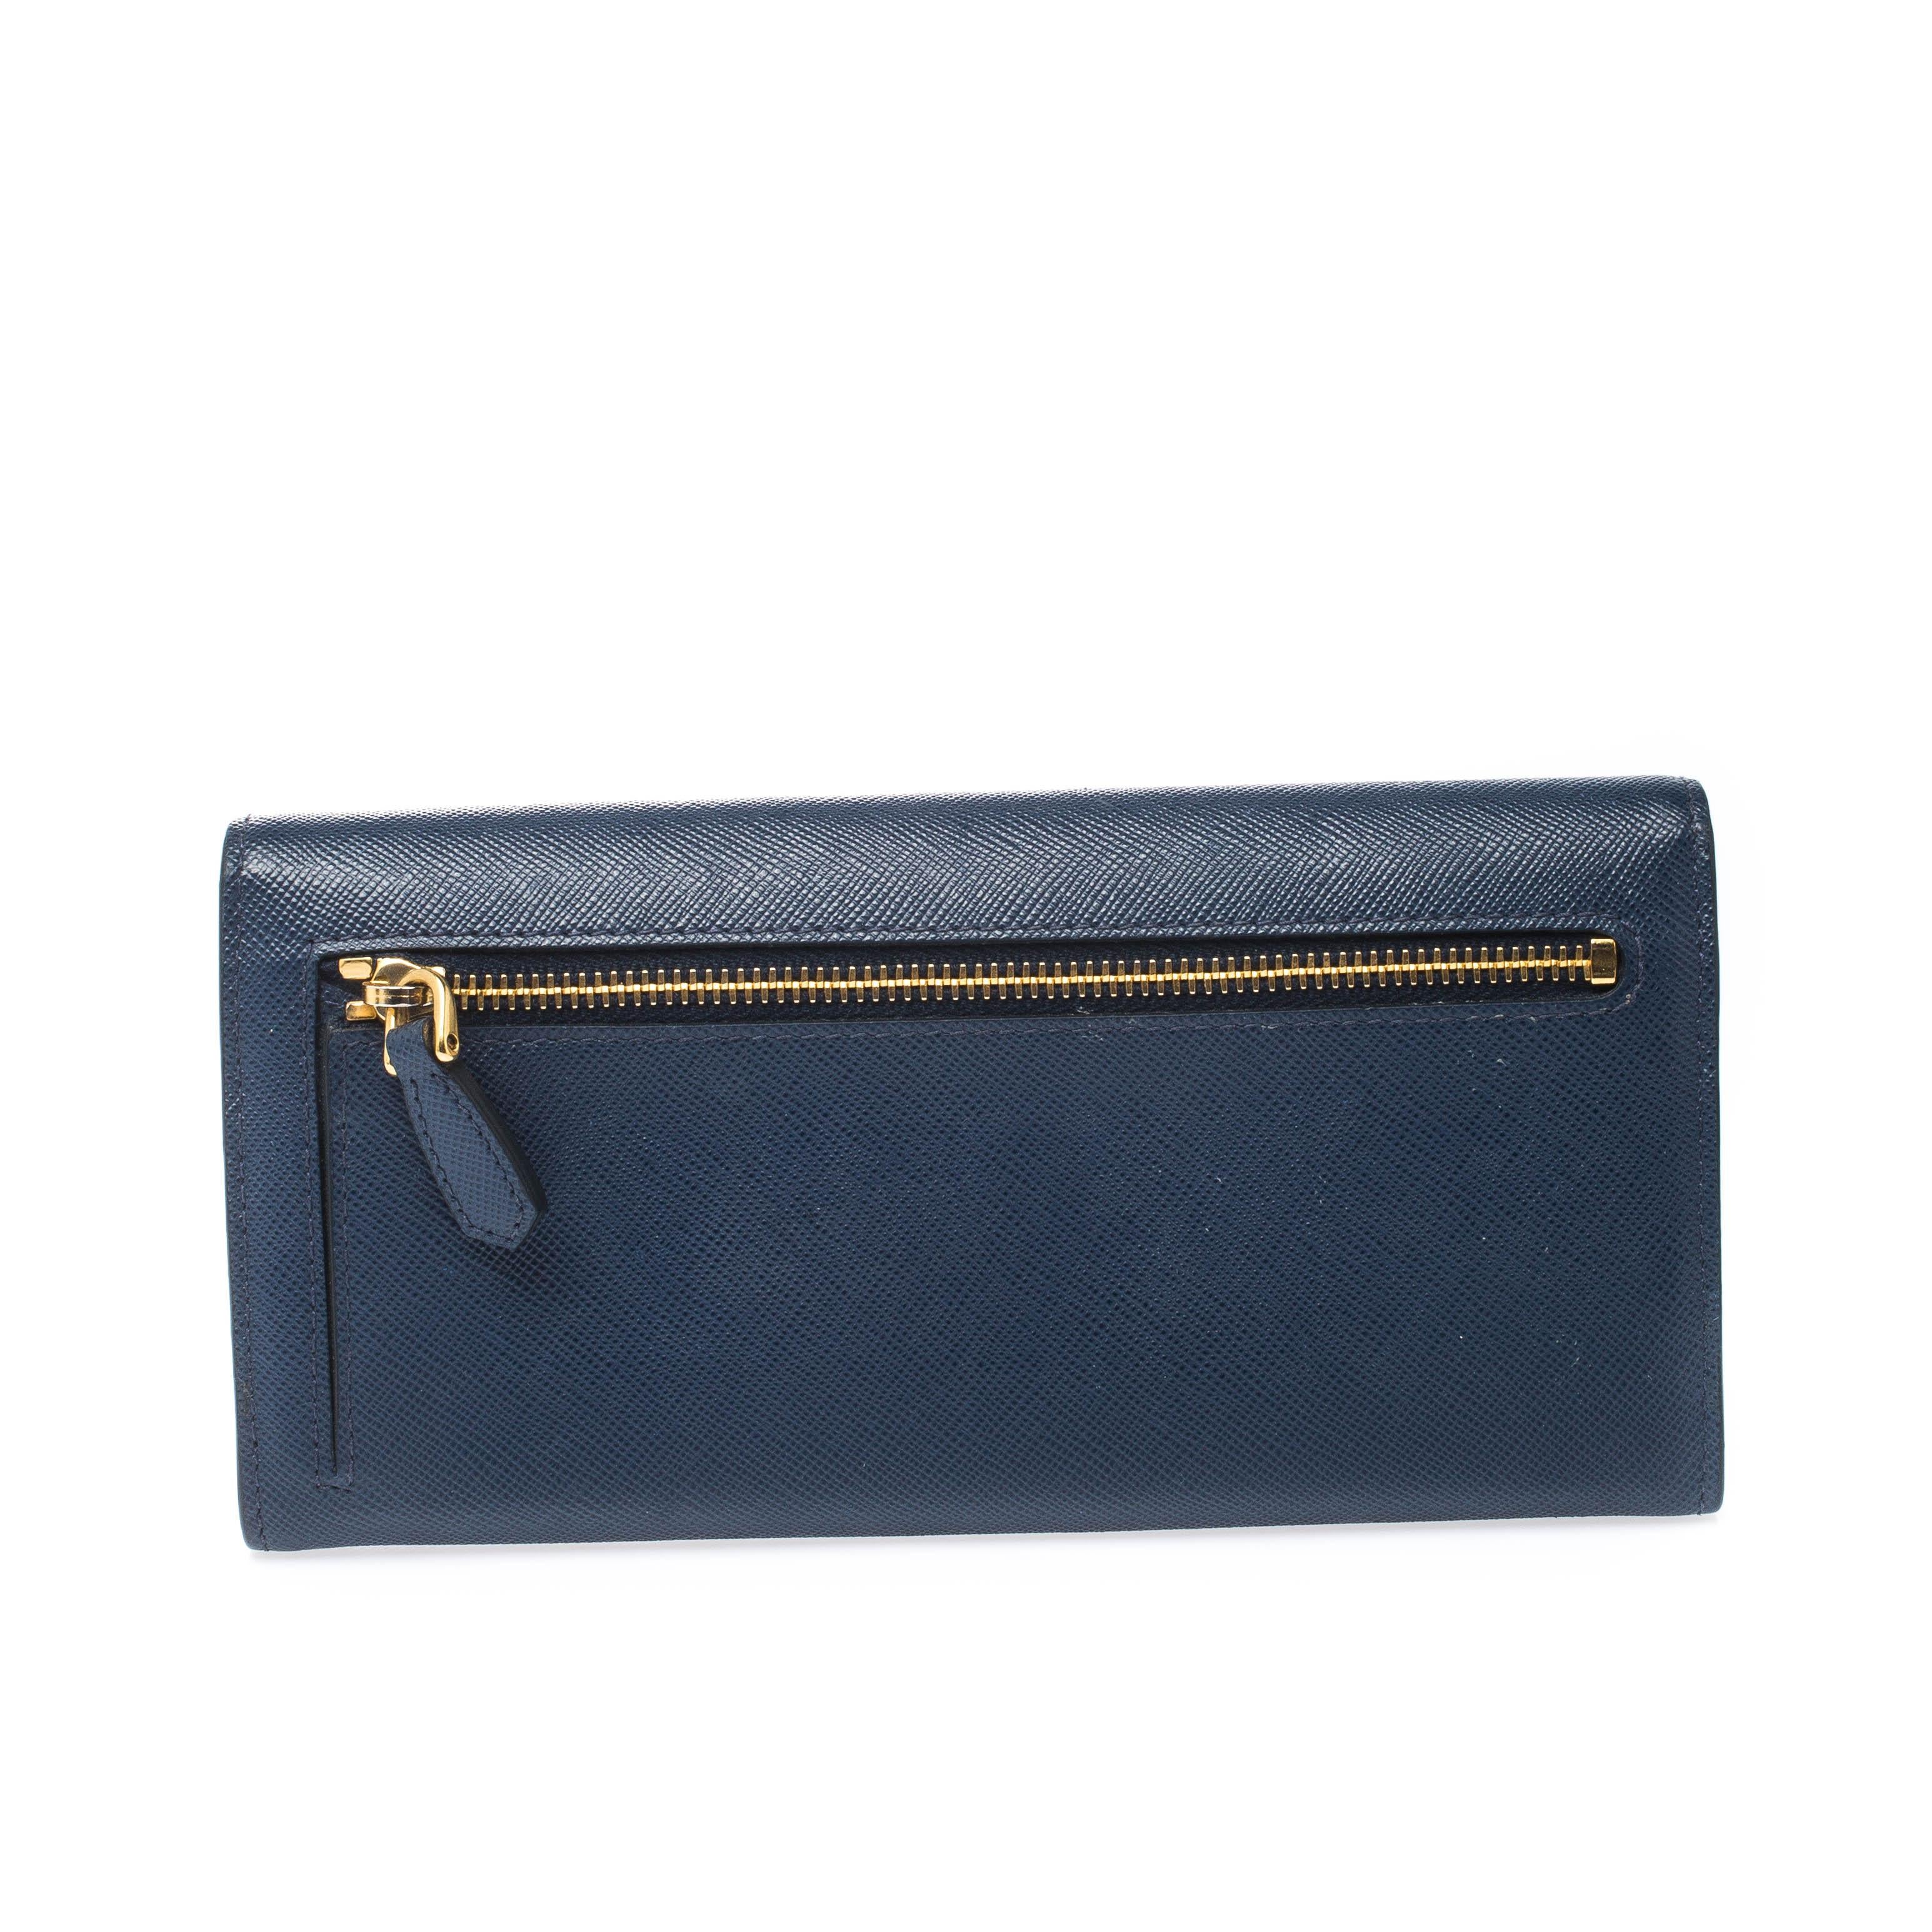 Designed to perfection and crafted from Saffiano Lux leather, this wallet can be your go-to accessory. Bringing multiple slots and compartments, this piece from Prada is stylish and convenient. Add a touch of chic style to your wardrobe with this